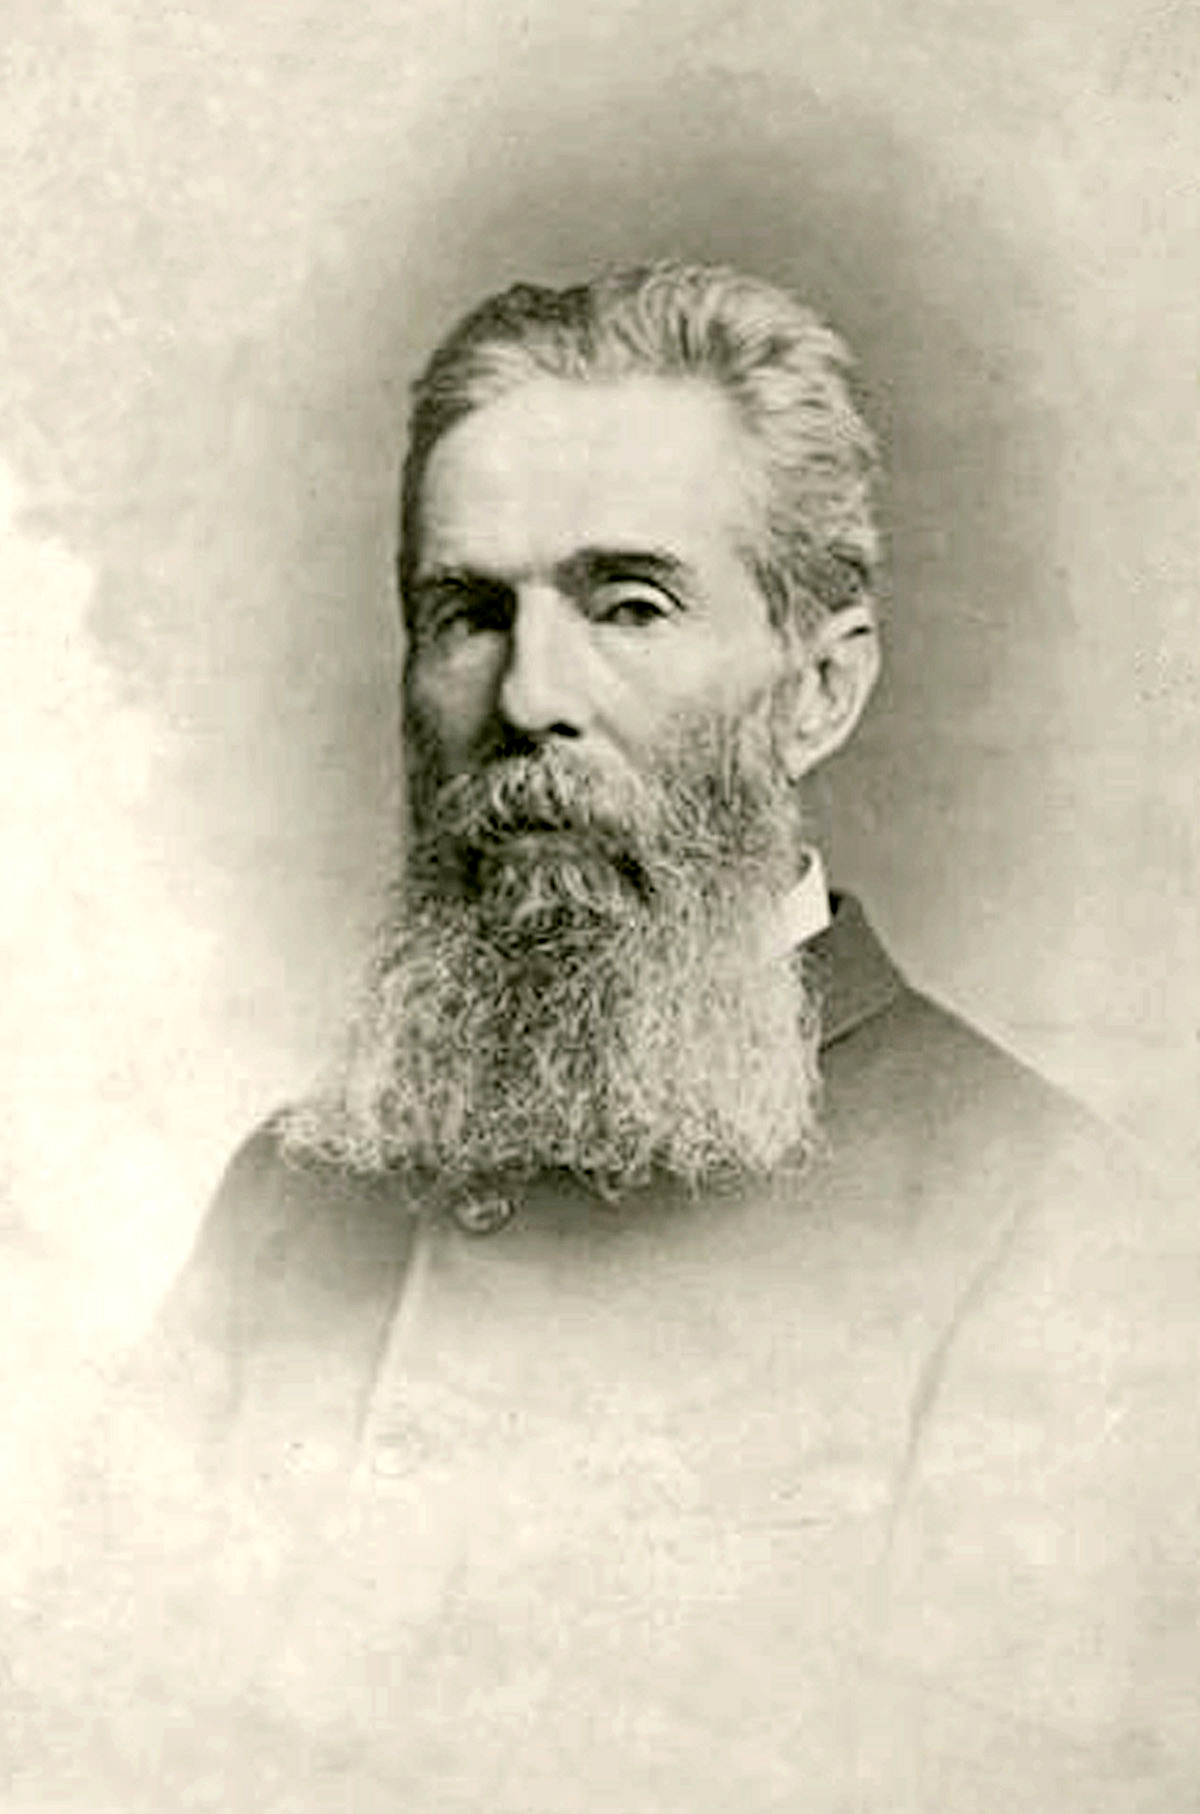 Herman Melville (1819-1891)1885 portrait by Rockwood, 17 Union Square (West), New York; George Gardner, photographer.  This photograph shows Herman Melville at the time of his retirement as a customs inspector at the Port of New York.